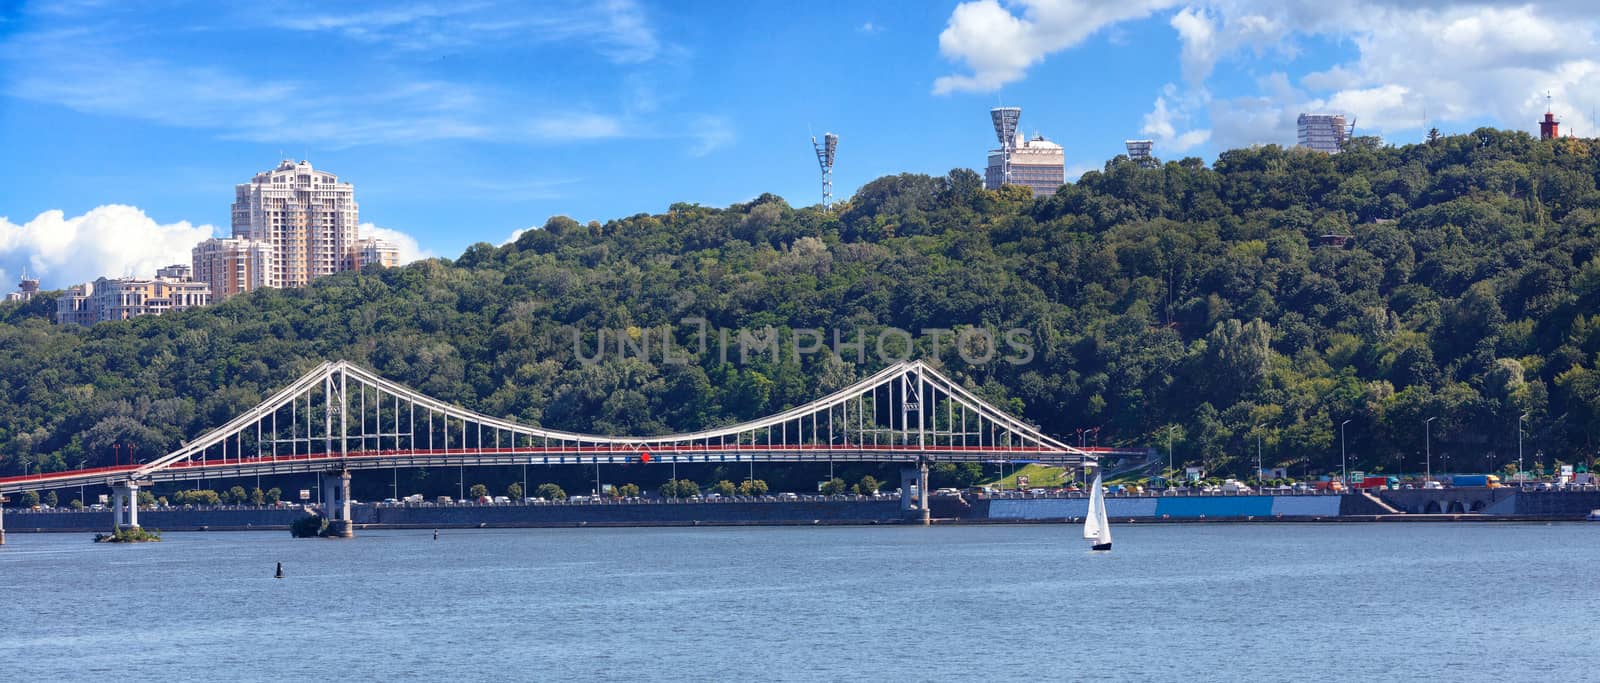 Panorama of the city of Kyiv, a view of the Dnipro River and a pedestrian bridge. by Sergii